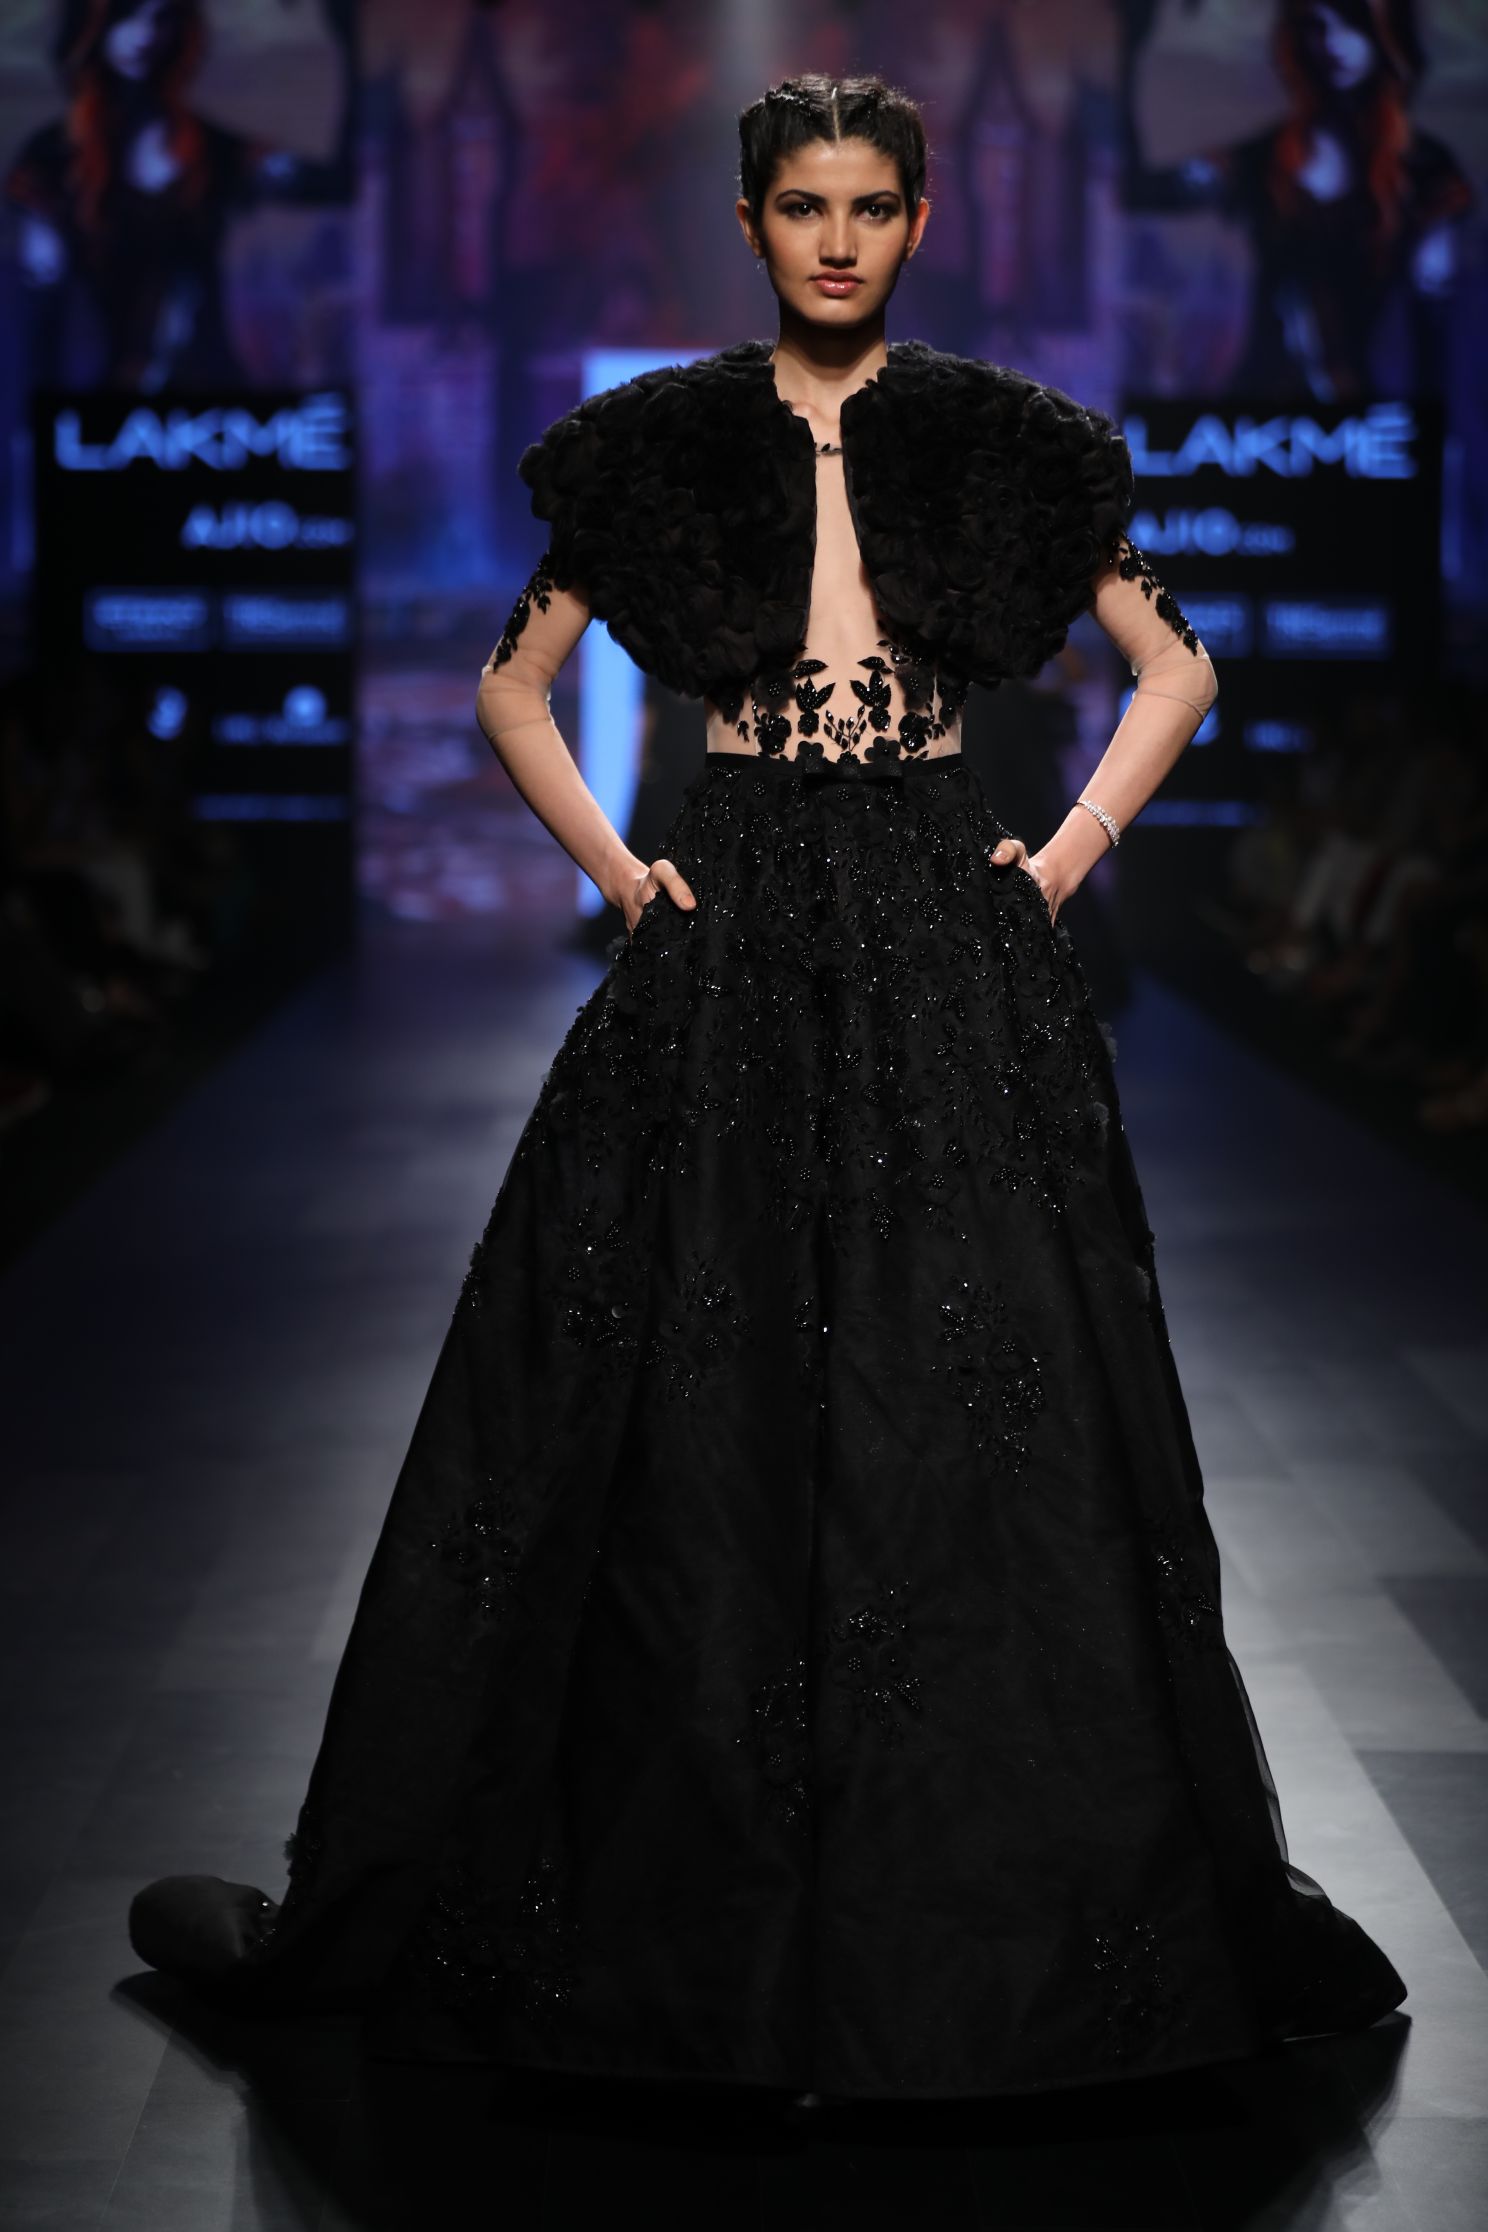 Amit GT - Black ball gown with feathers